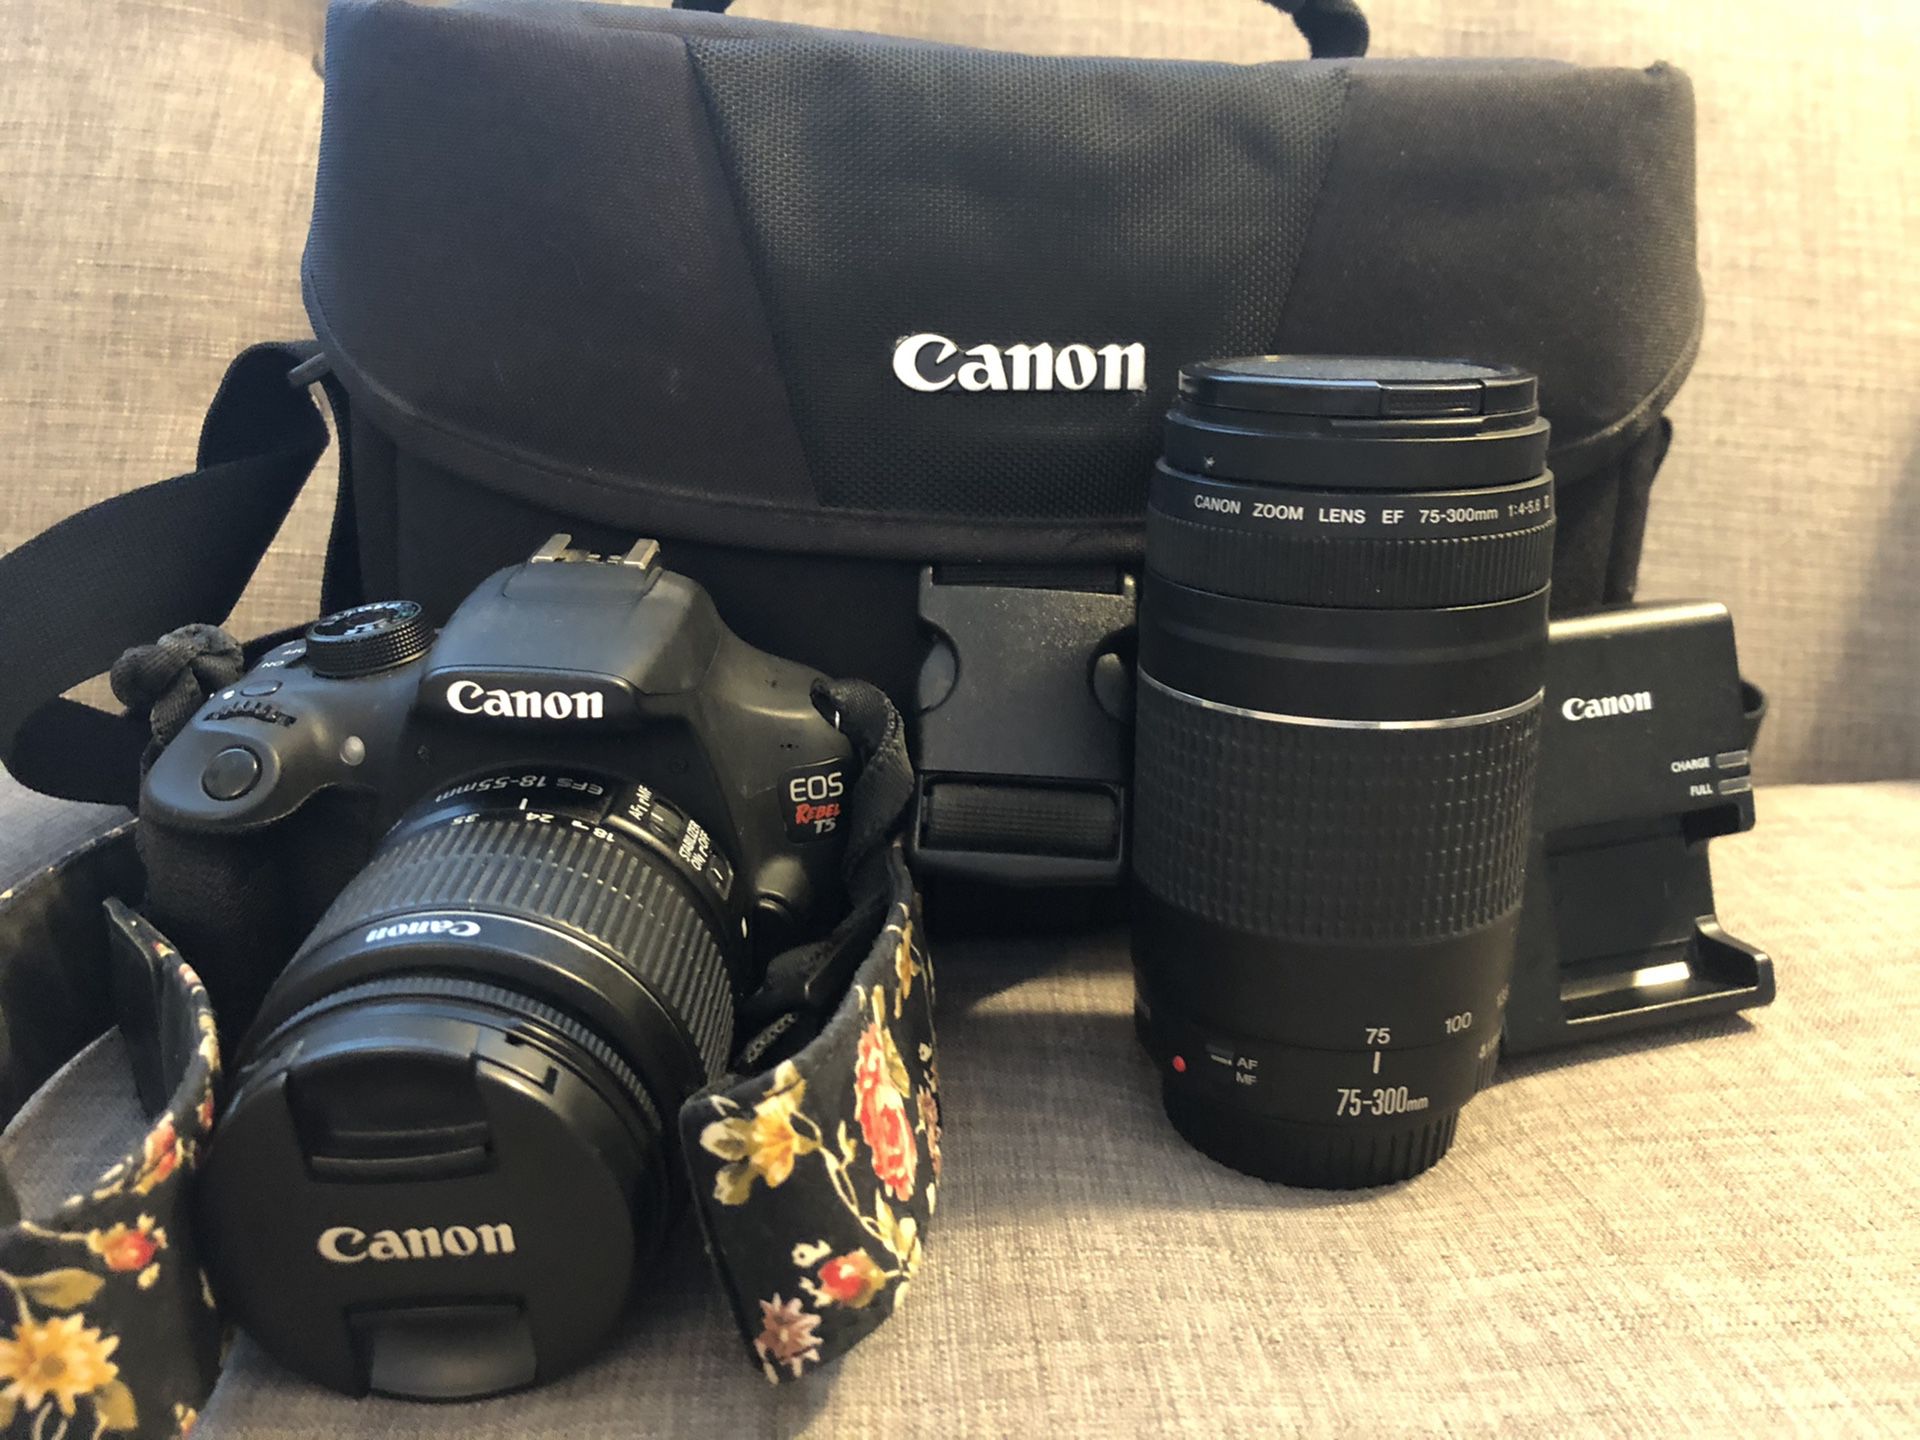 Canon EOS Rebel T5 DSLR Two Lens Kit with EF-S 18-55mm IS II and EF 75